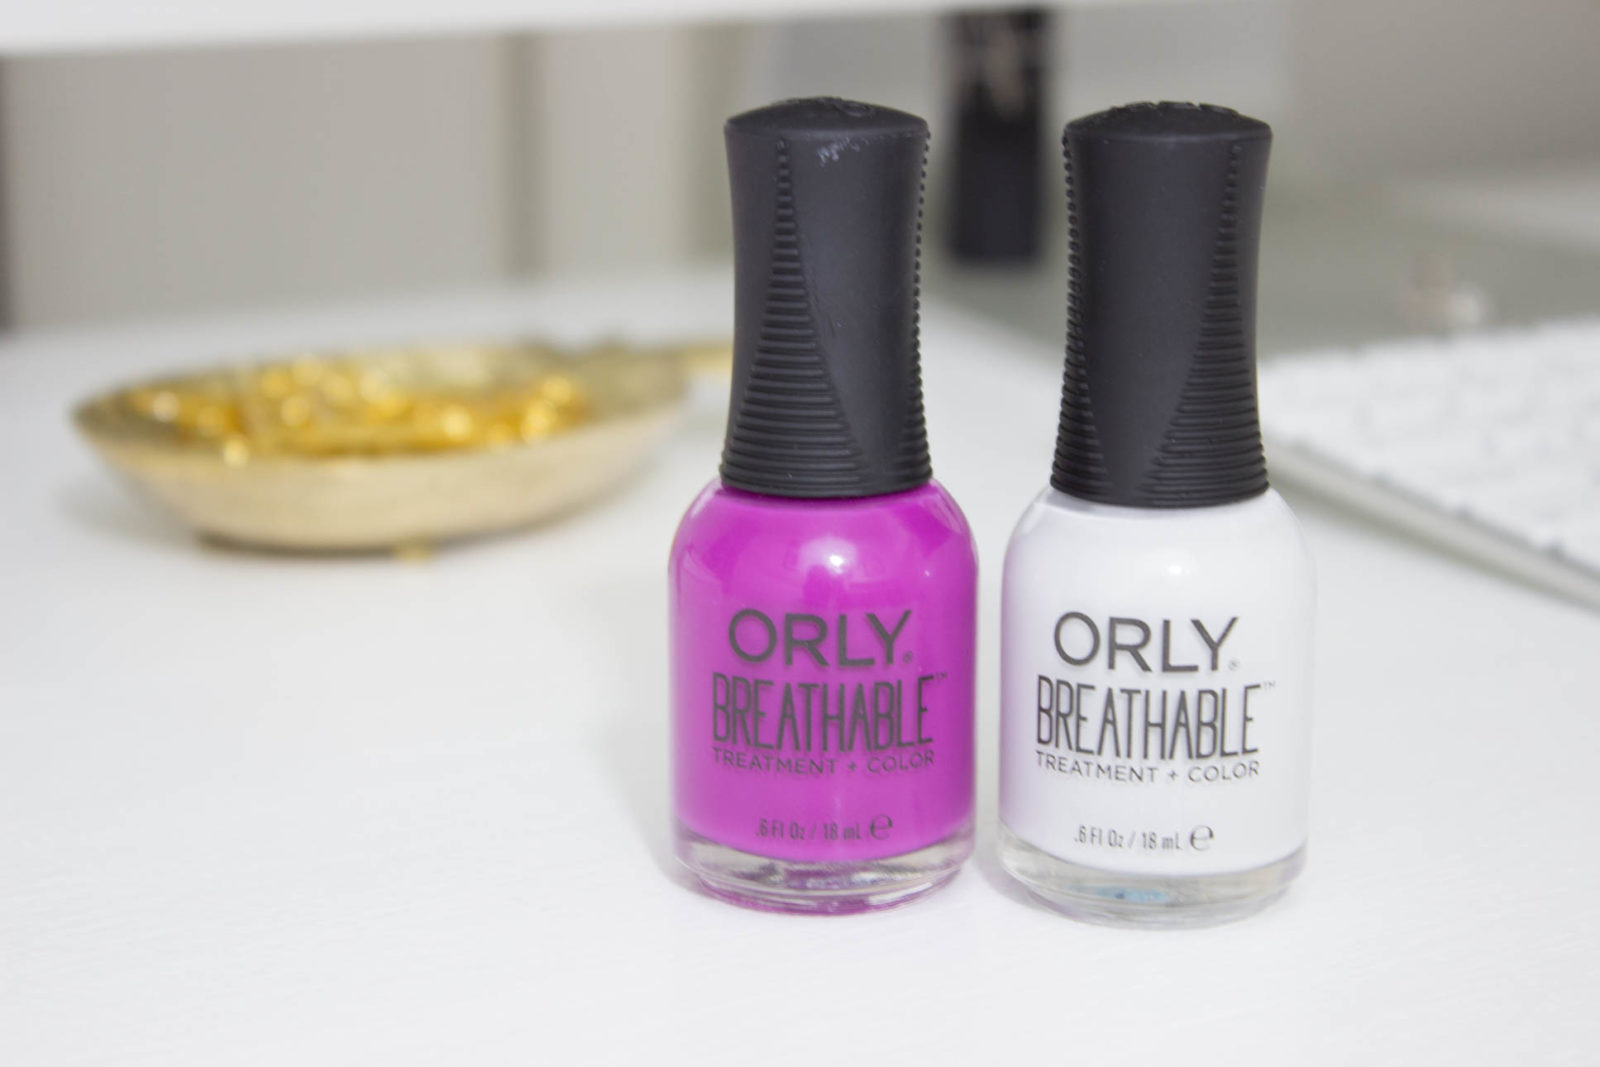 9. Orly Breathable Treatment + Color in "Love My Nails" - wide 9